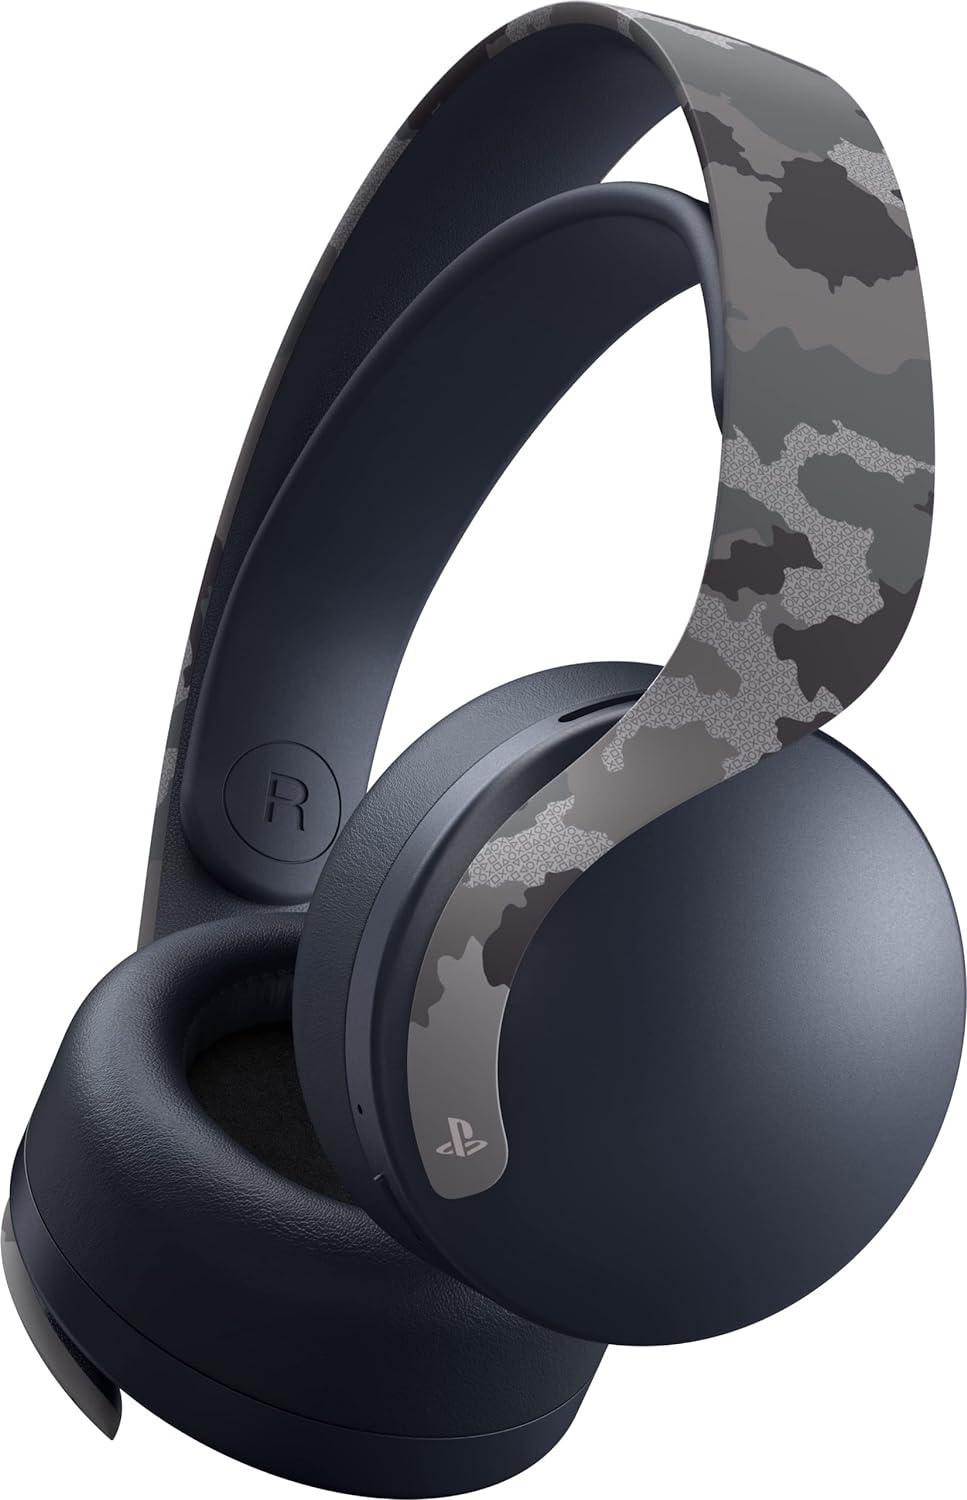 Pulse 3D Wireless Headset - Grey - PlayStation 5 - Want a New Gadget